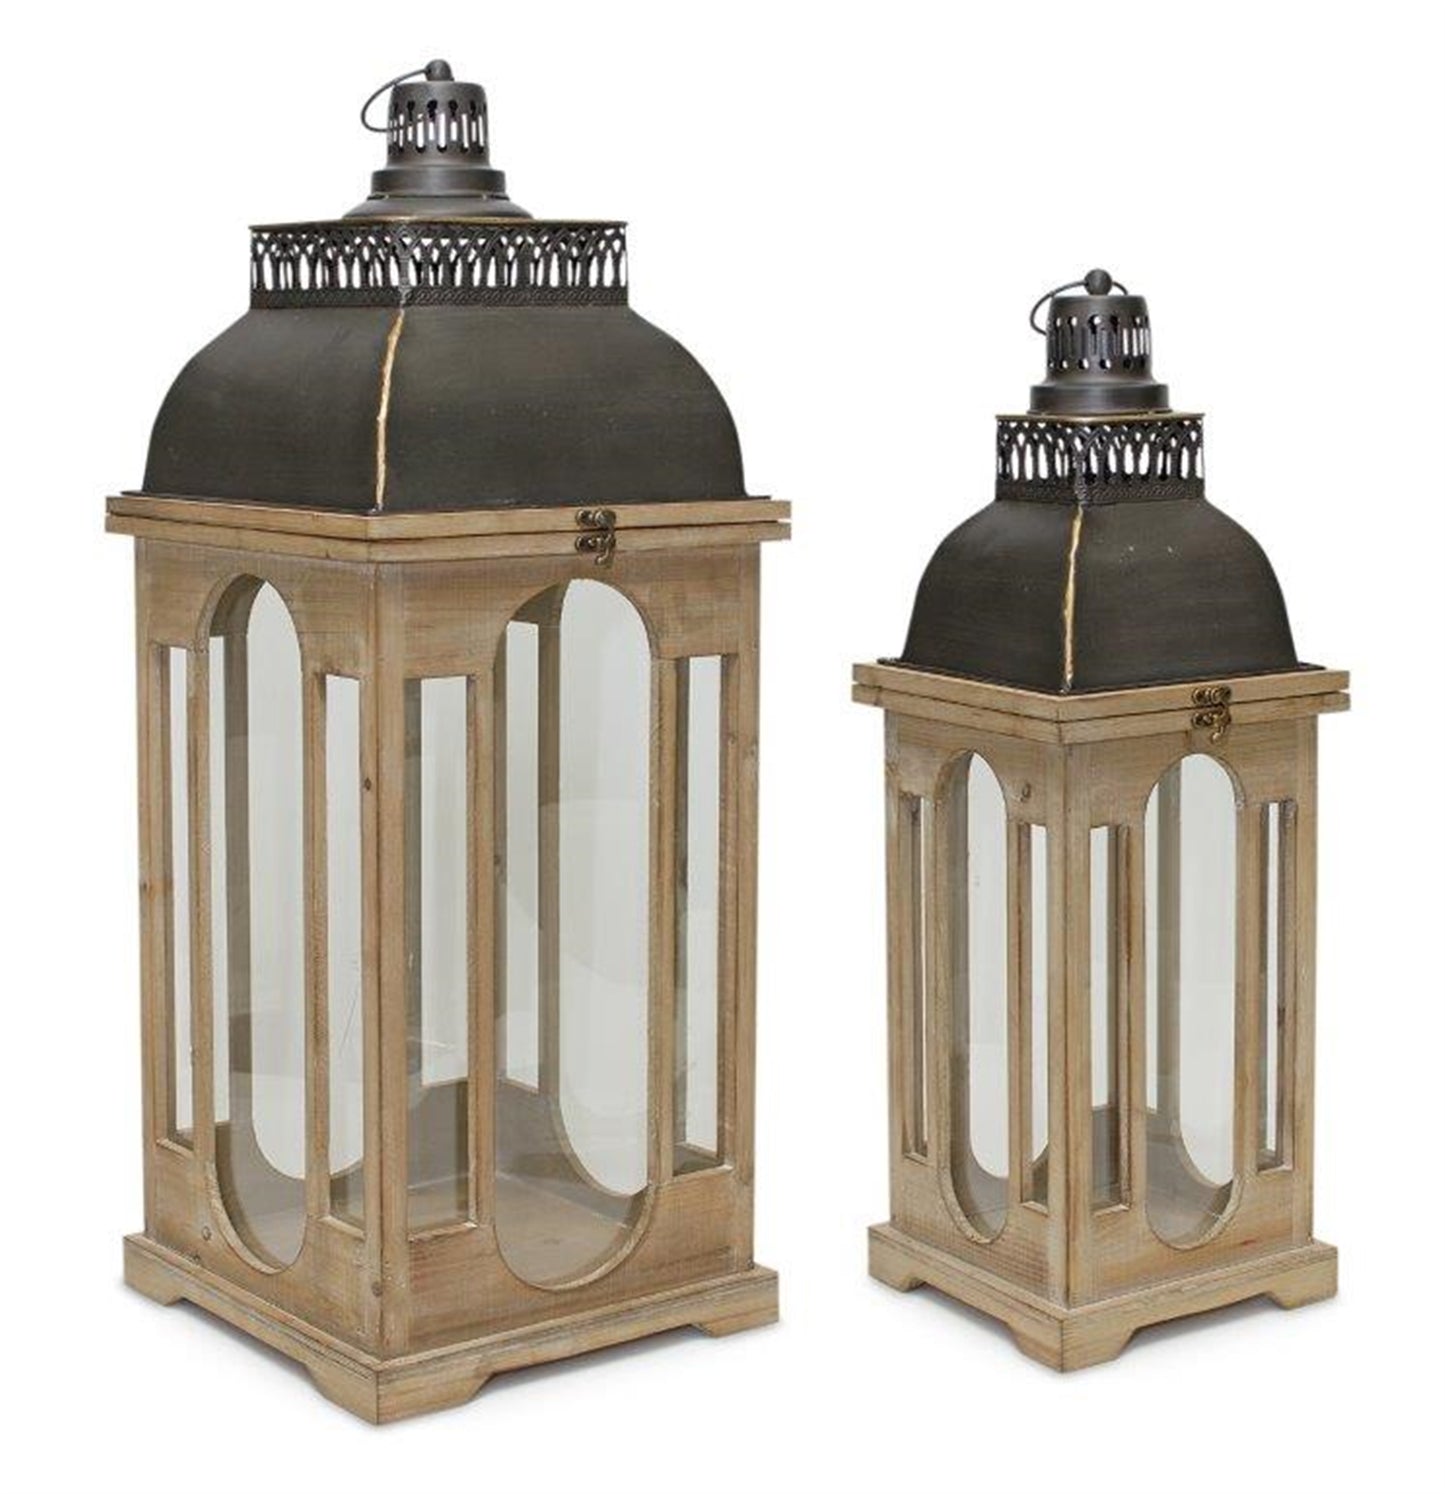 Natural Wooden Lantern with Distressed Metal Lid and Ornate Design (Set of 2)